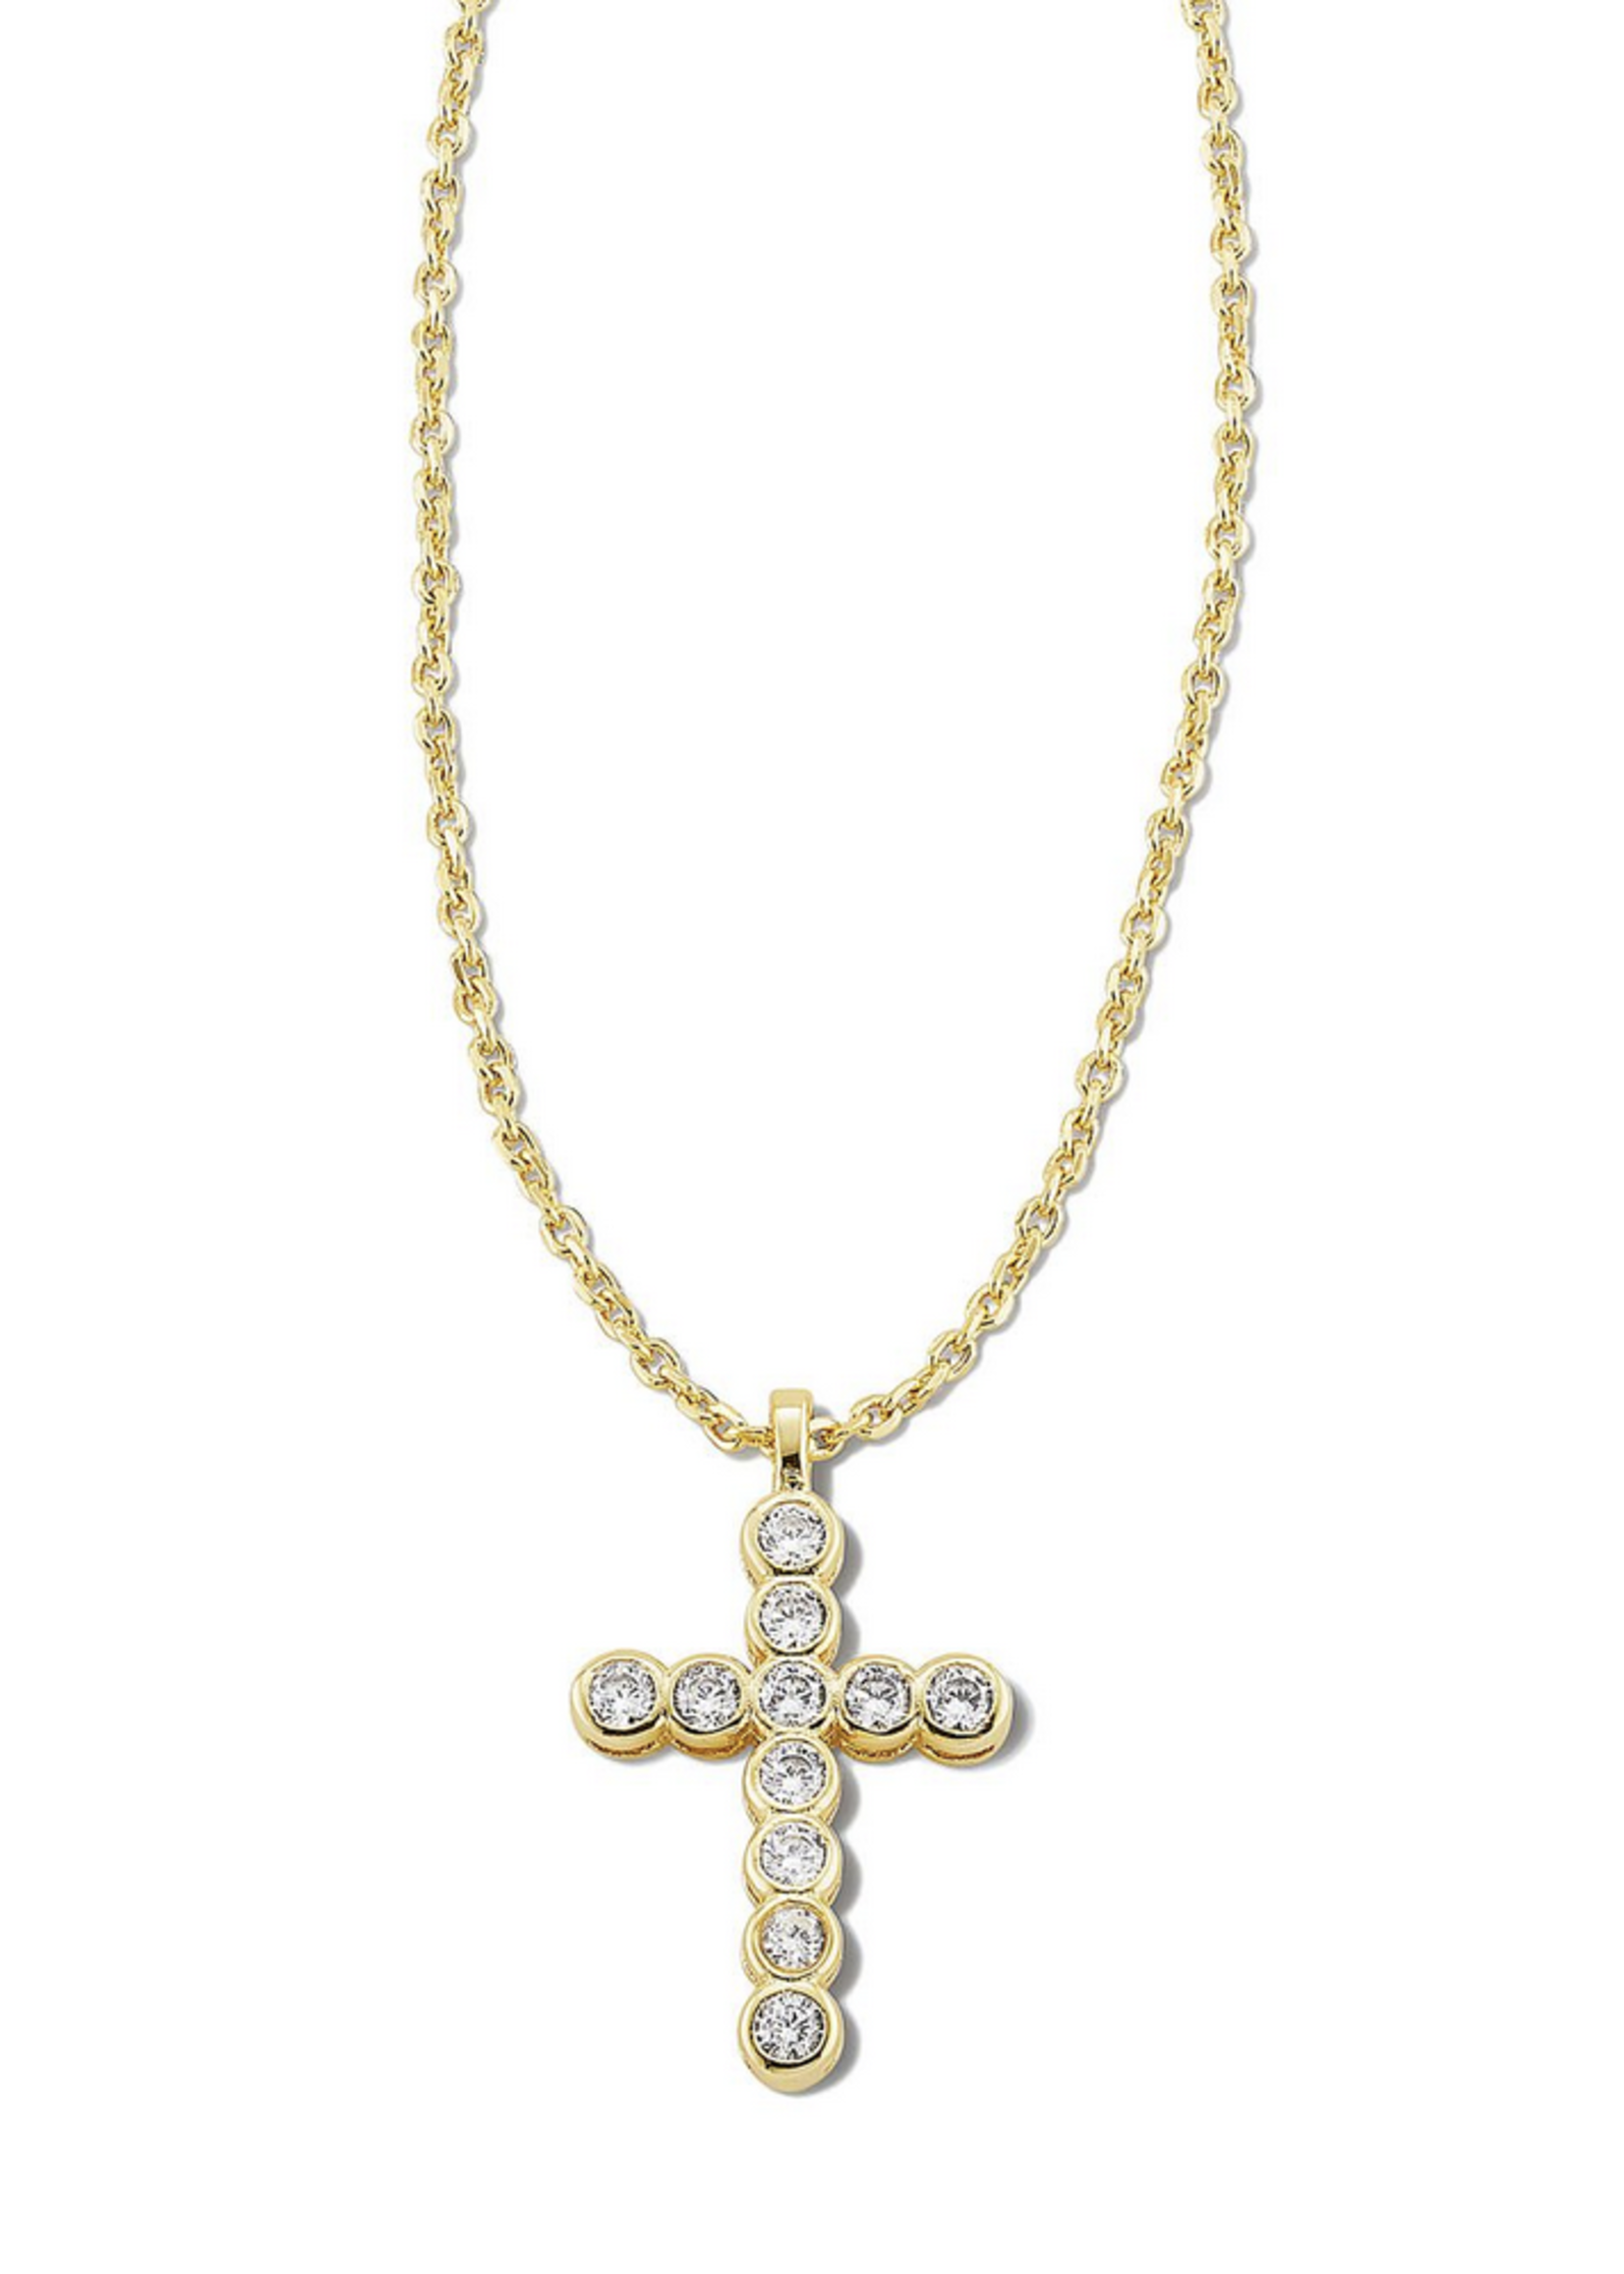 CROSS CRYSTAL PENDANT NECKLACE